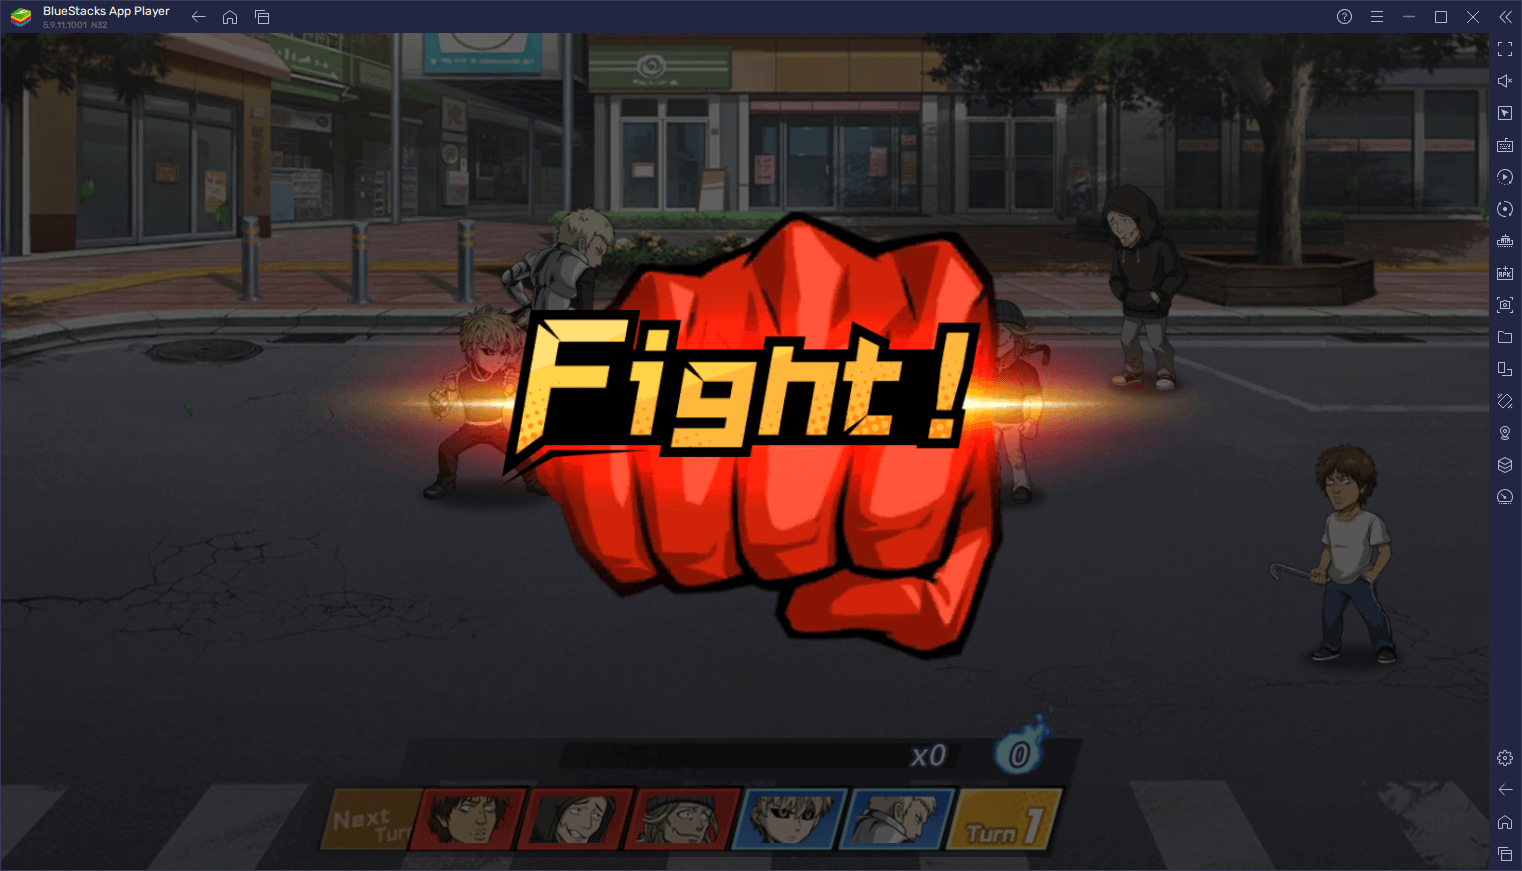 One Punch Man - The Strongest on PC - Automate and Streamline Your Gameplay Experience with Our BlueStacks Tools